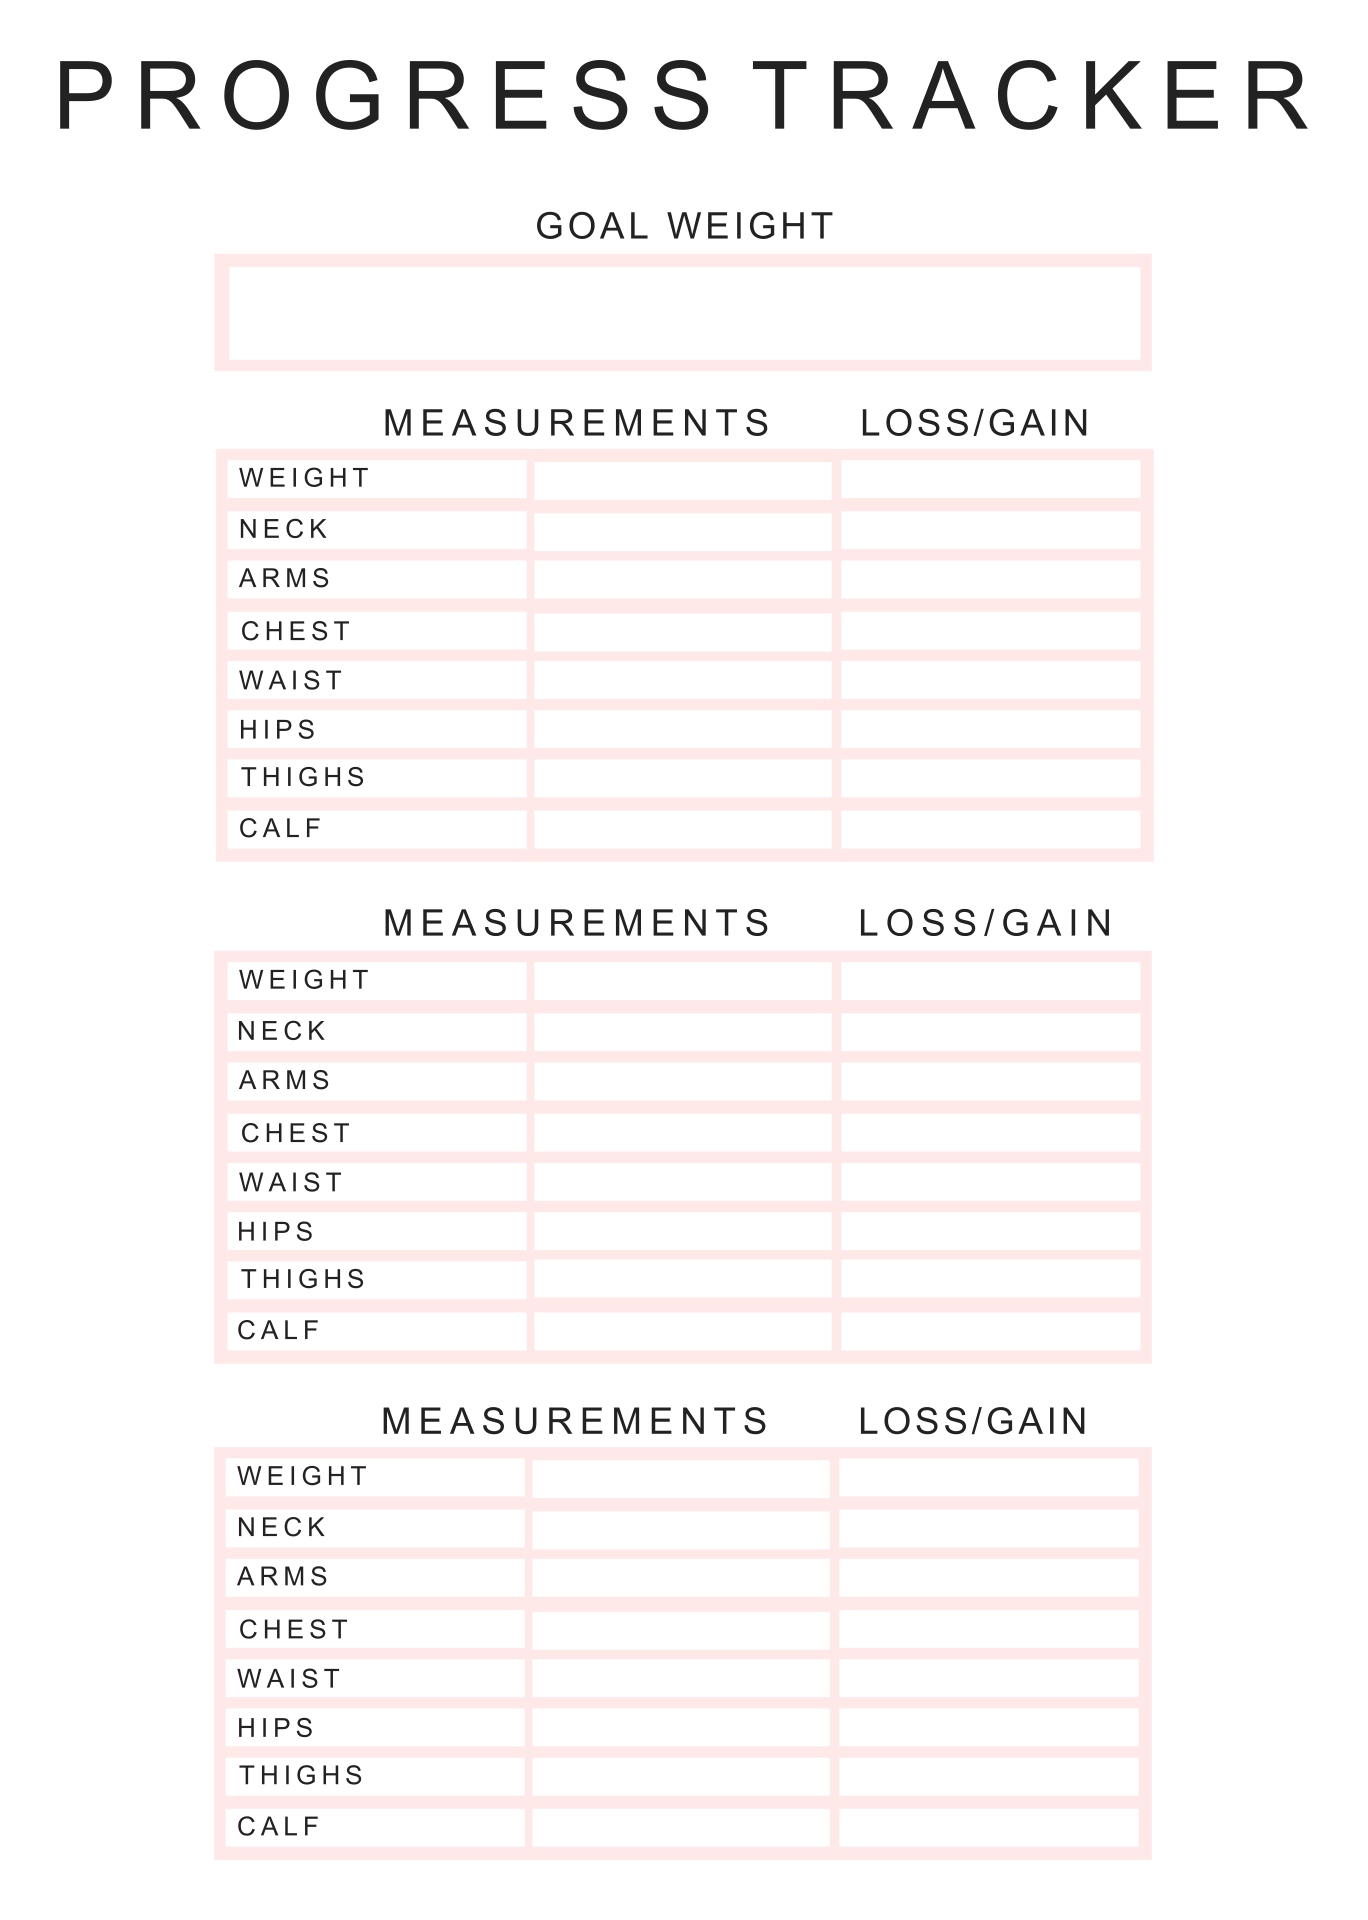 7-best-images-of-free-printable-weight-loss-tracker-free-printable